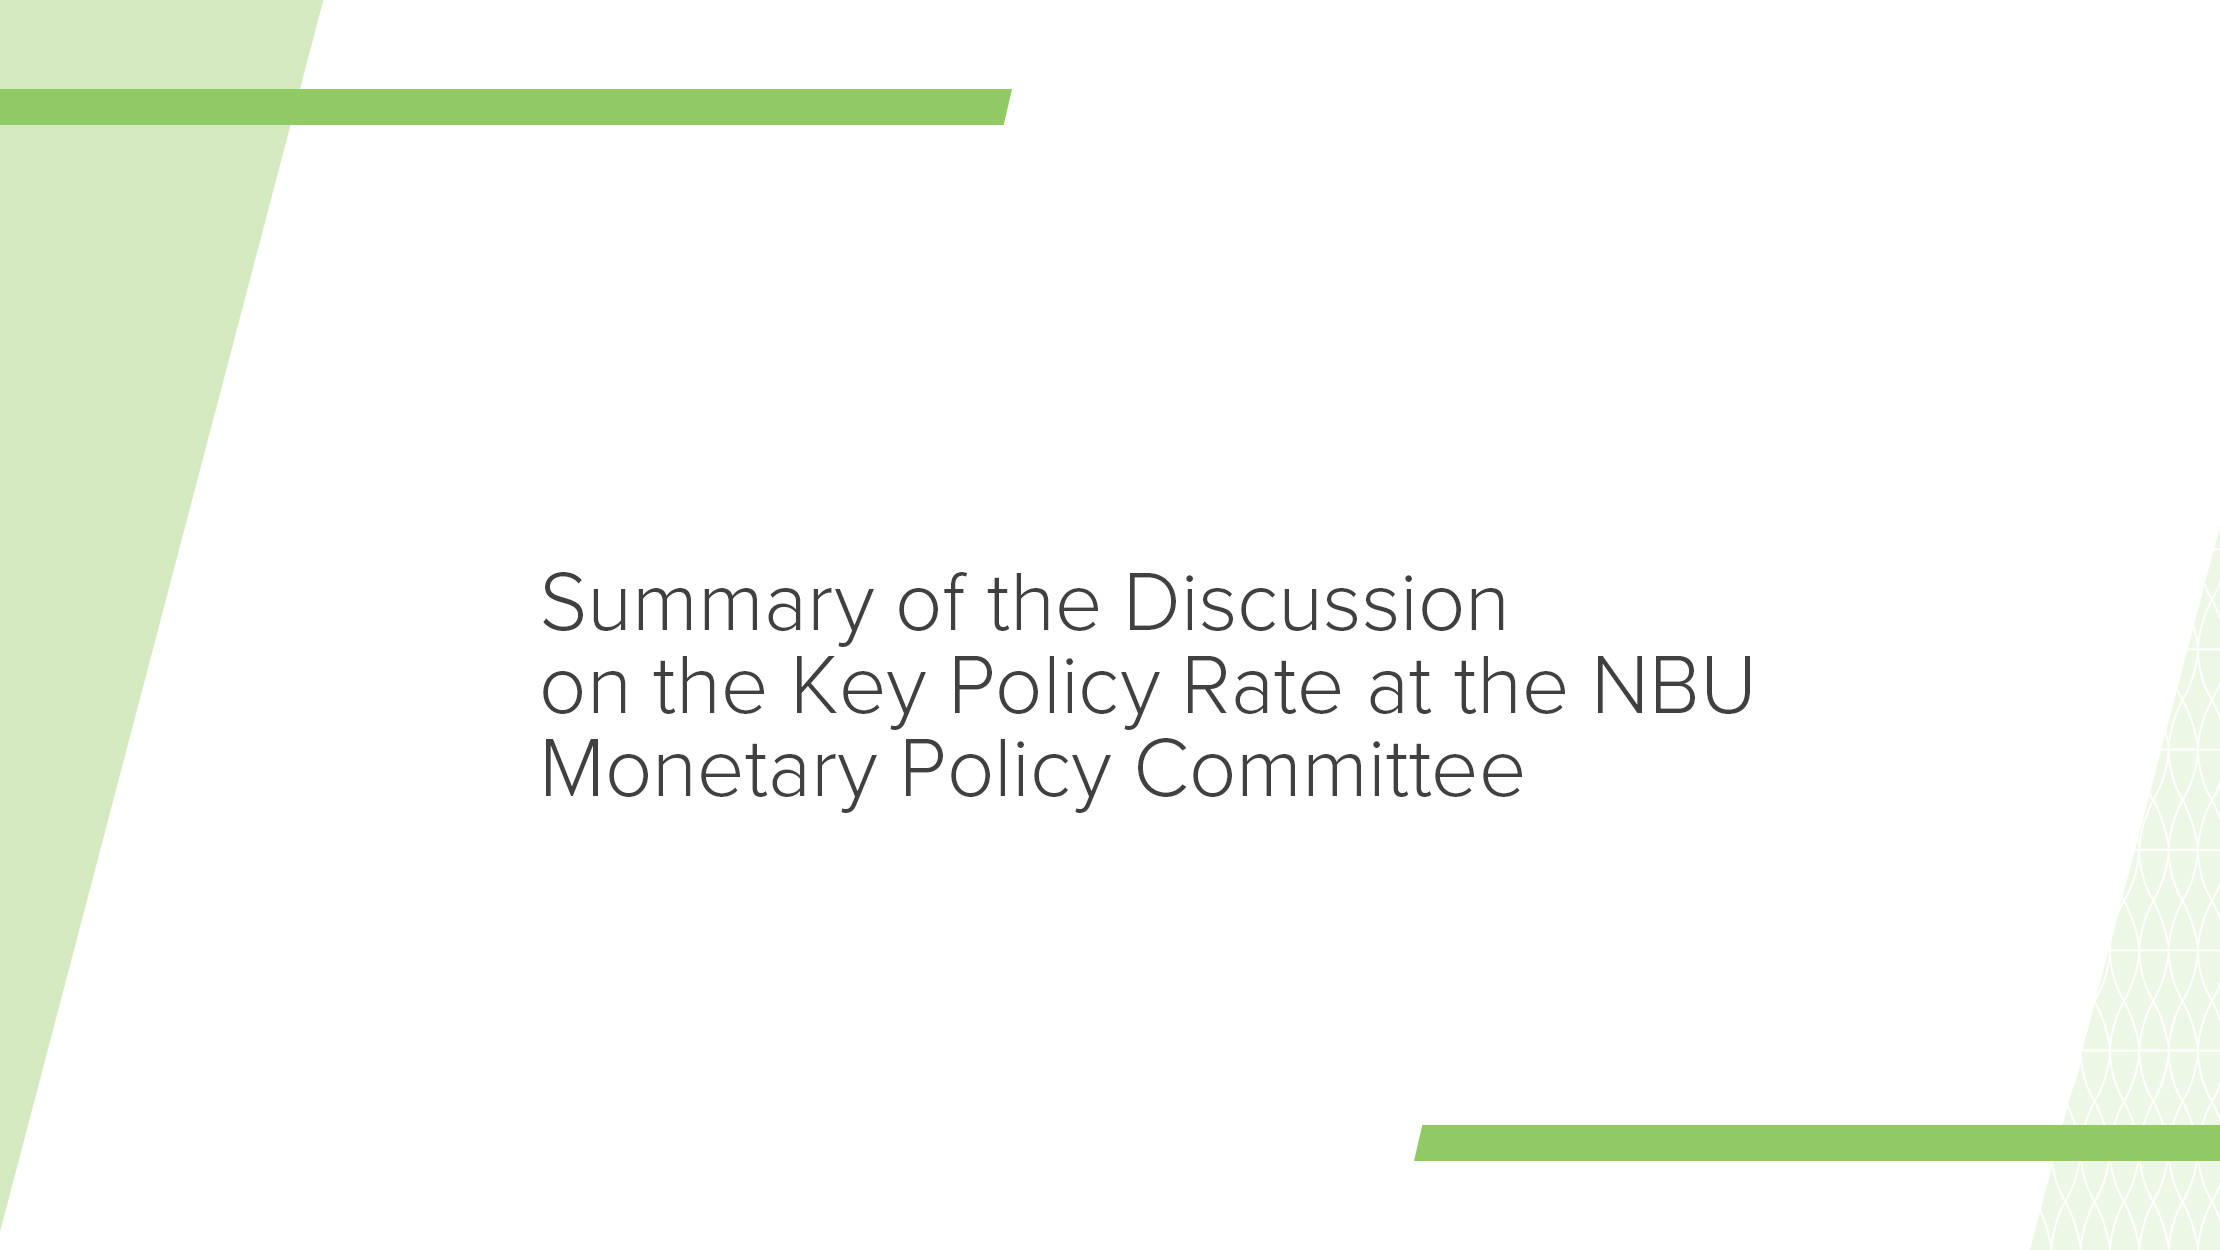 Summary of the Key Policy Rate Discussion by the NBU Monetary Policy Committee 29 January 2020